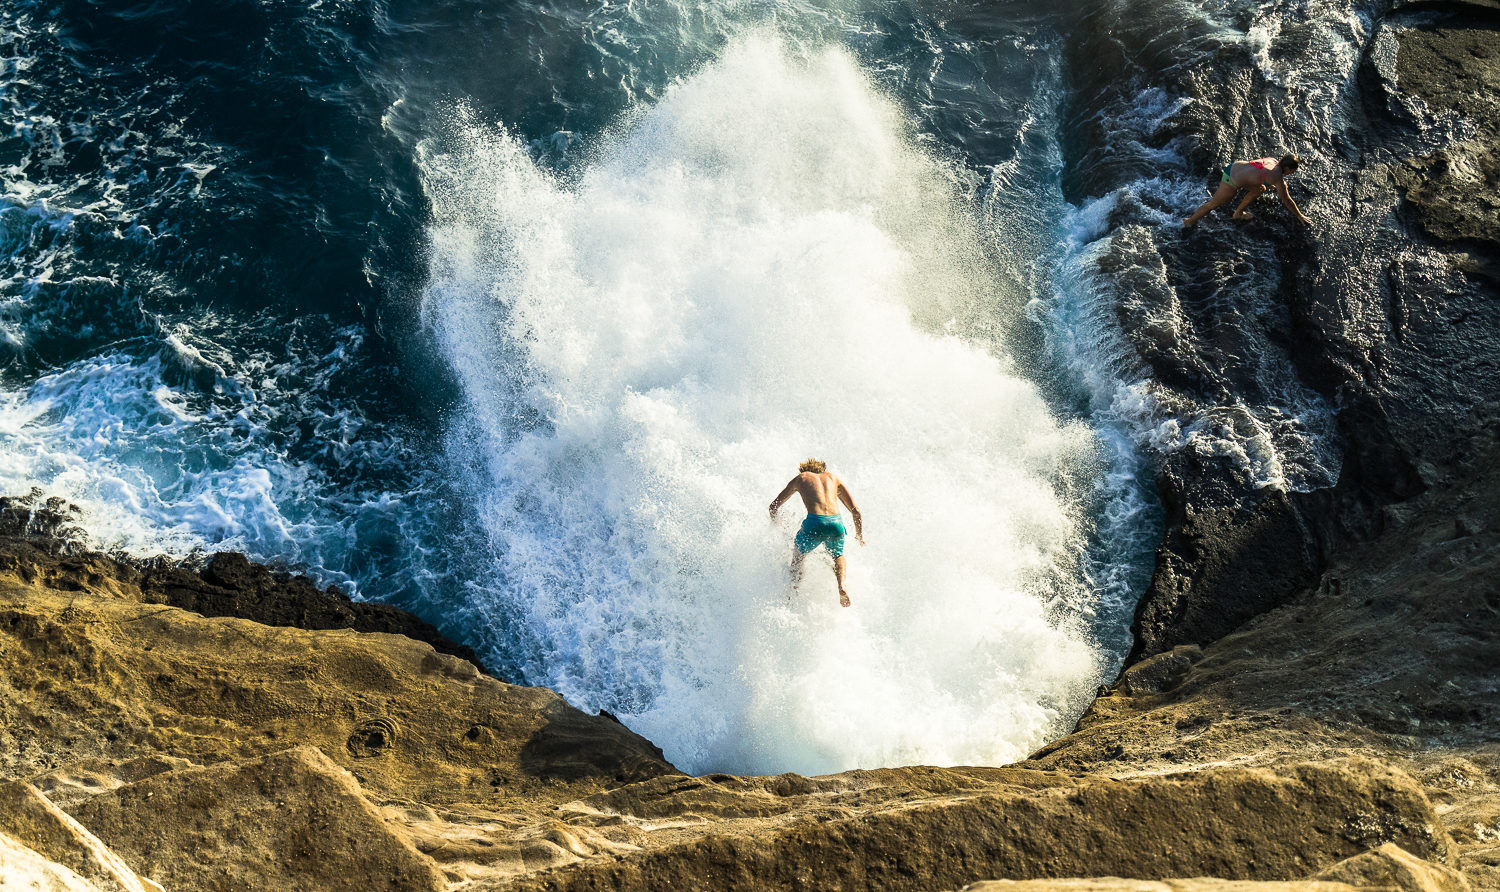 Spitting Cave Cliff Jumping Spot on Oahu, Hawaii